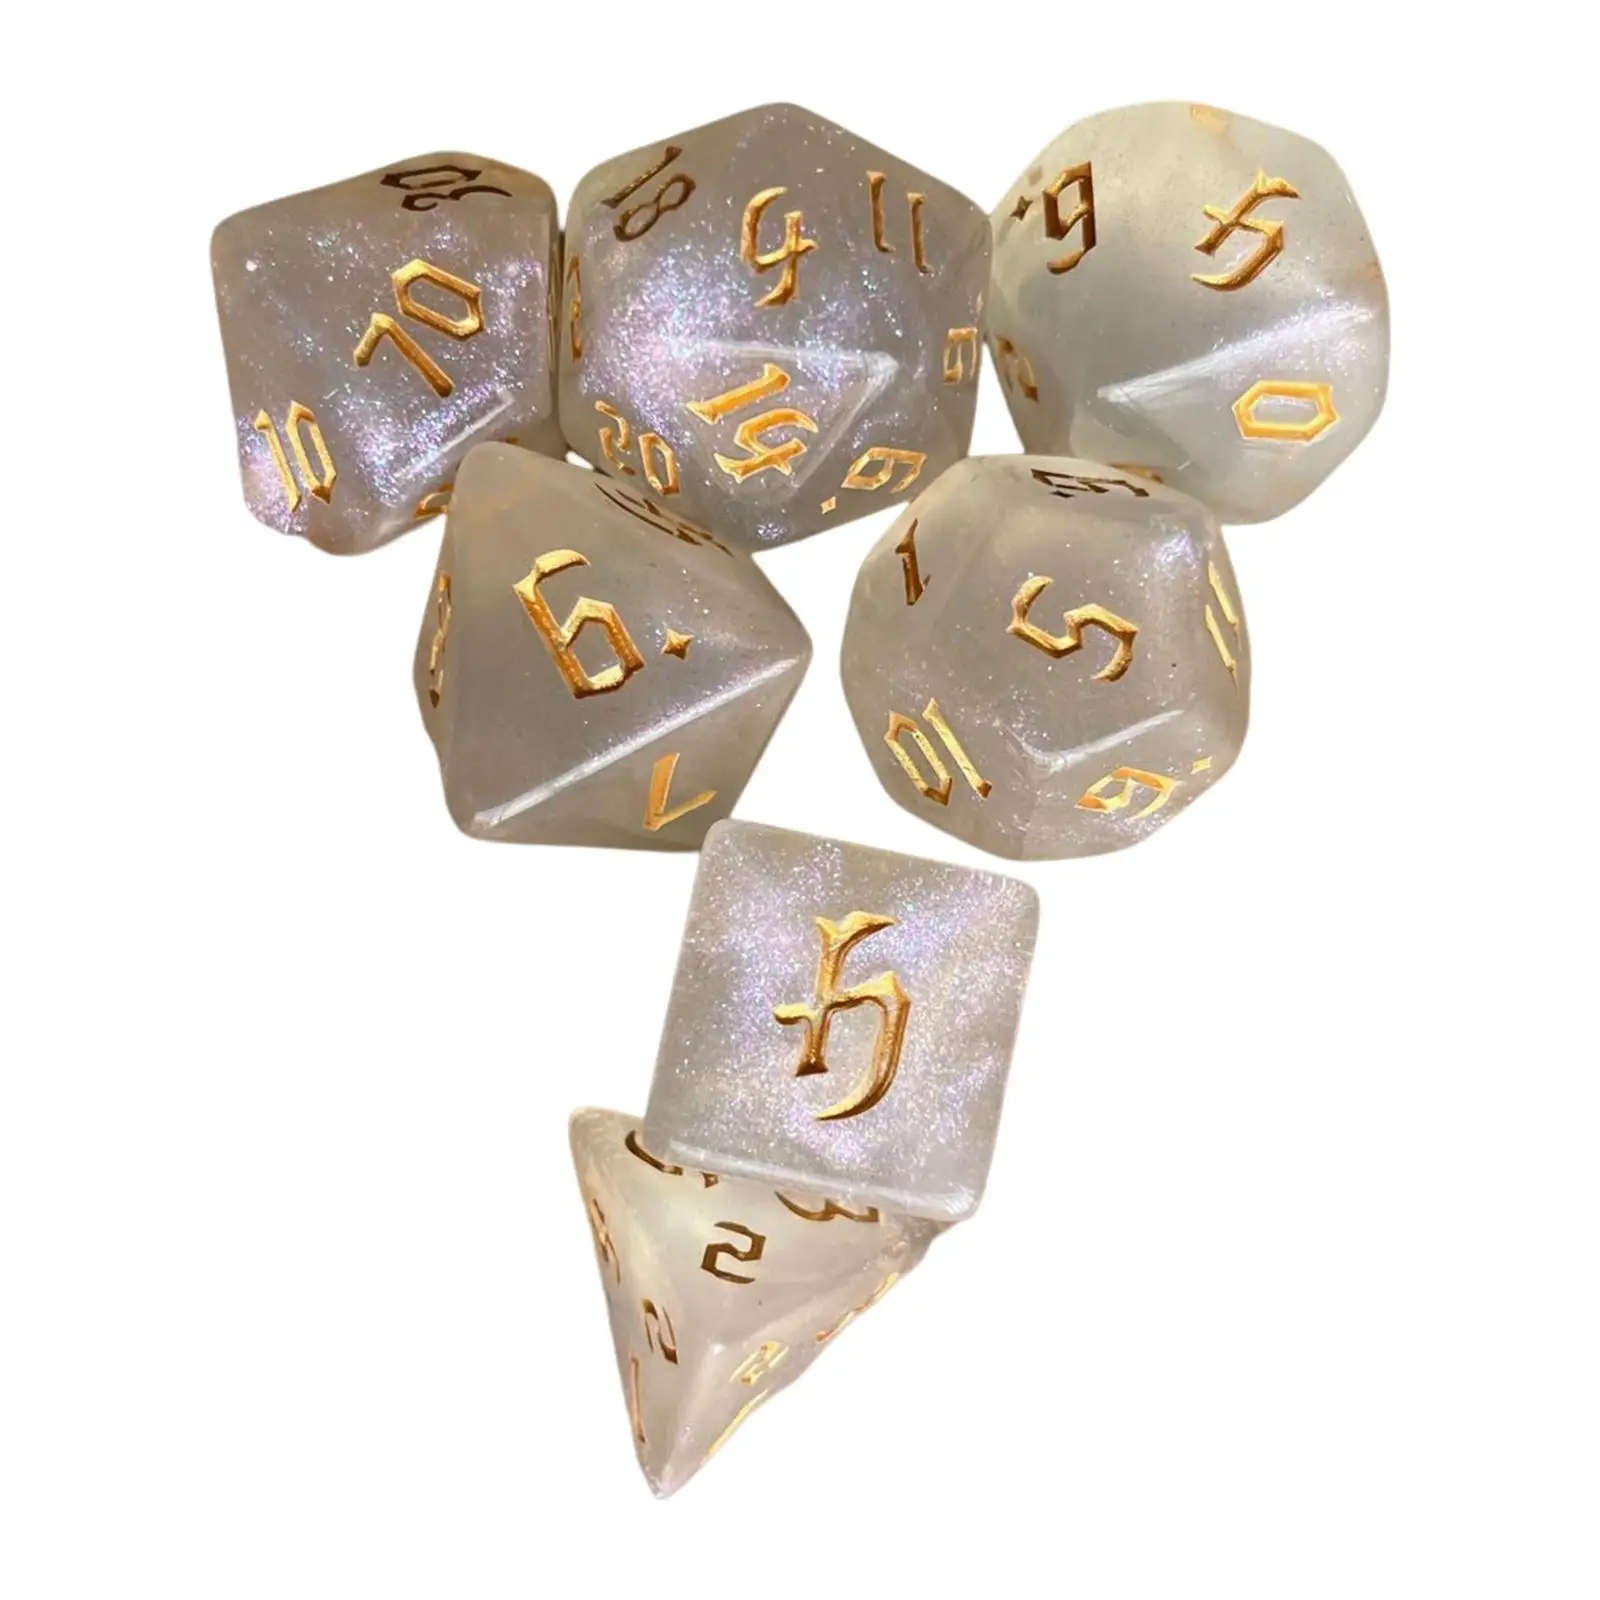 Engraved Polyhedral Dices Set Entertainment Toy 7Pcs for Board Game Props